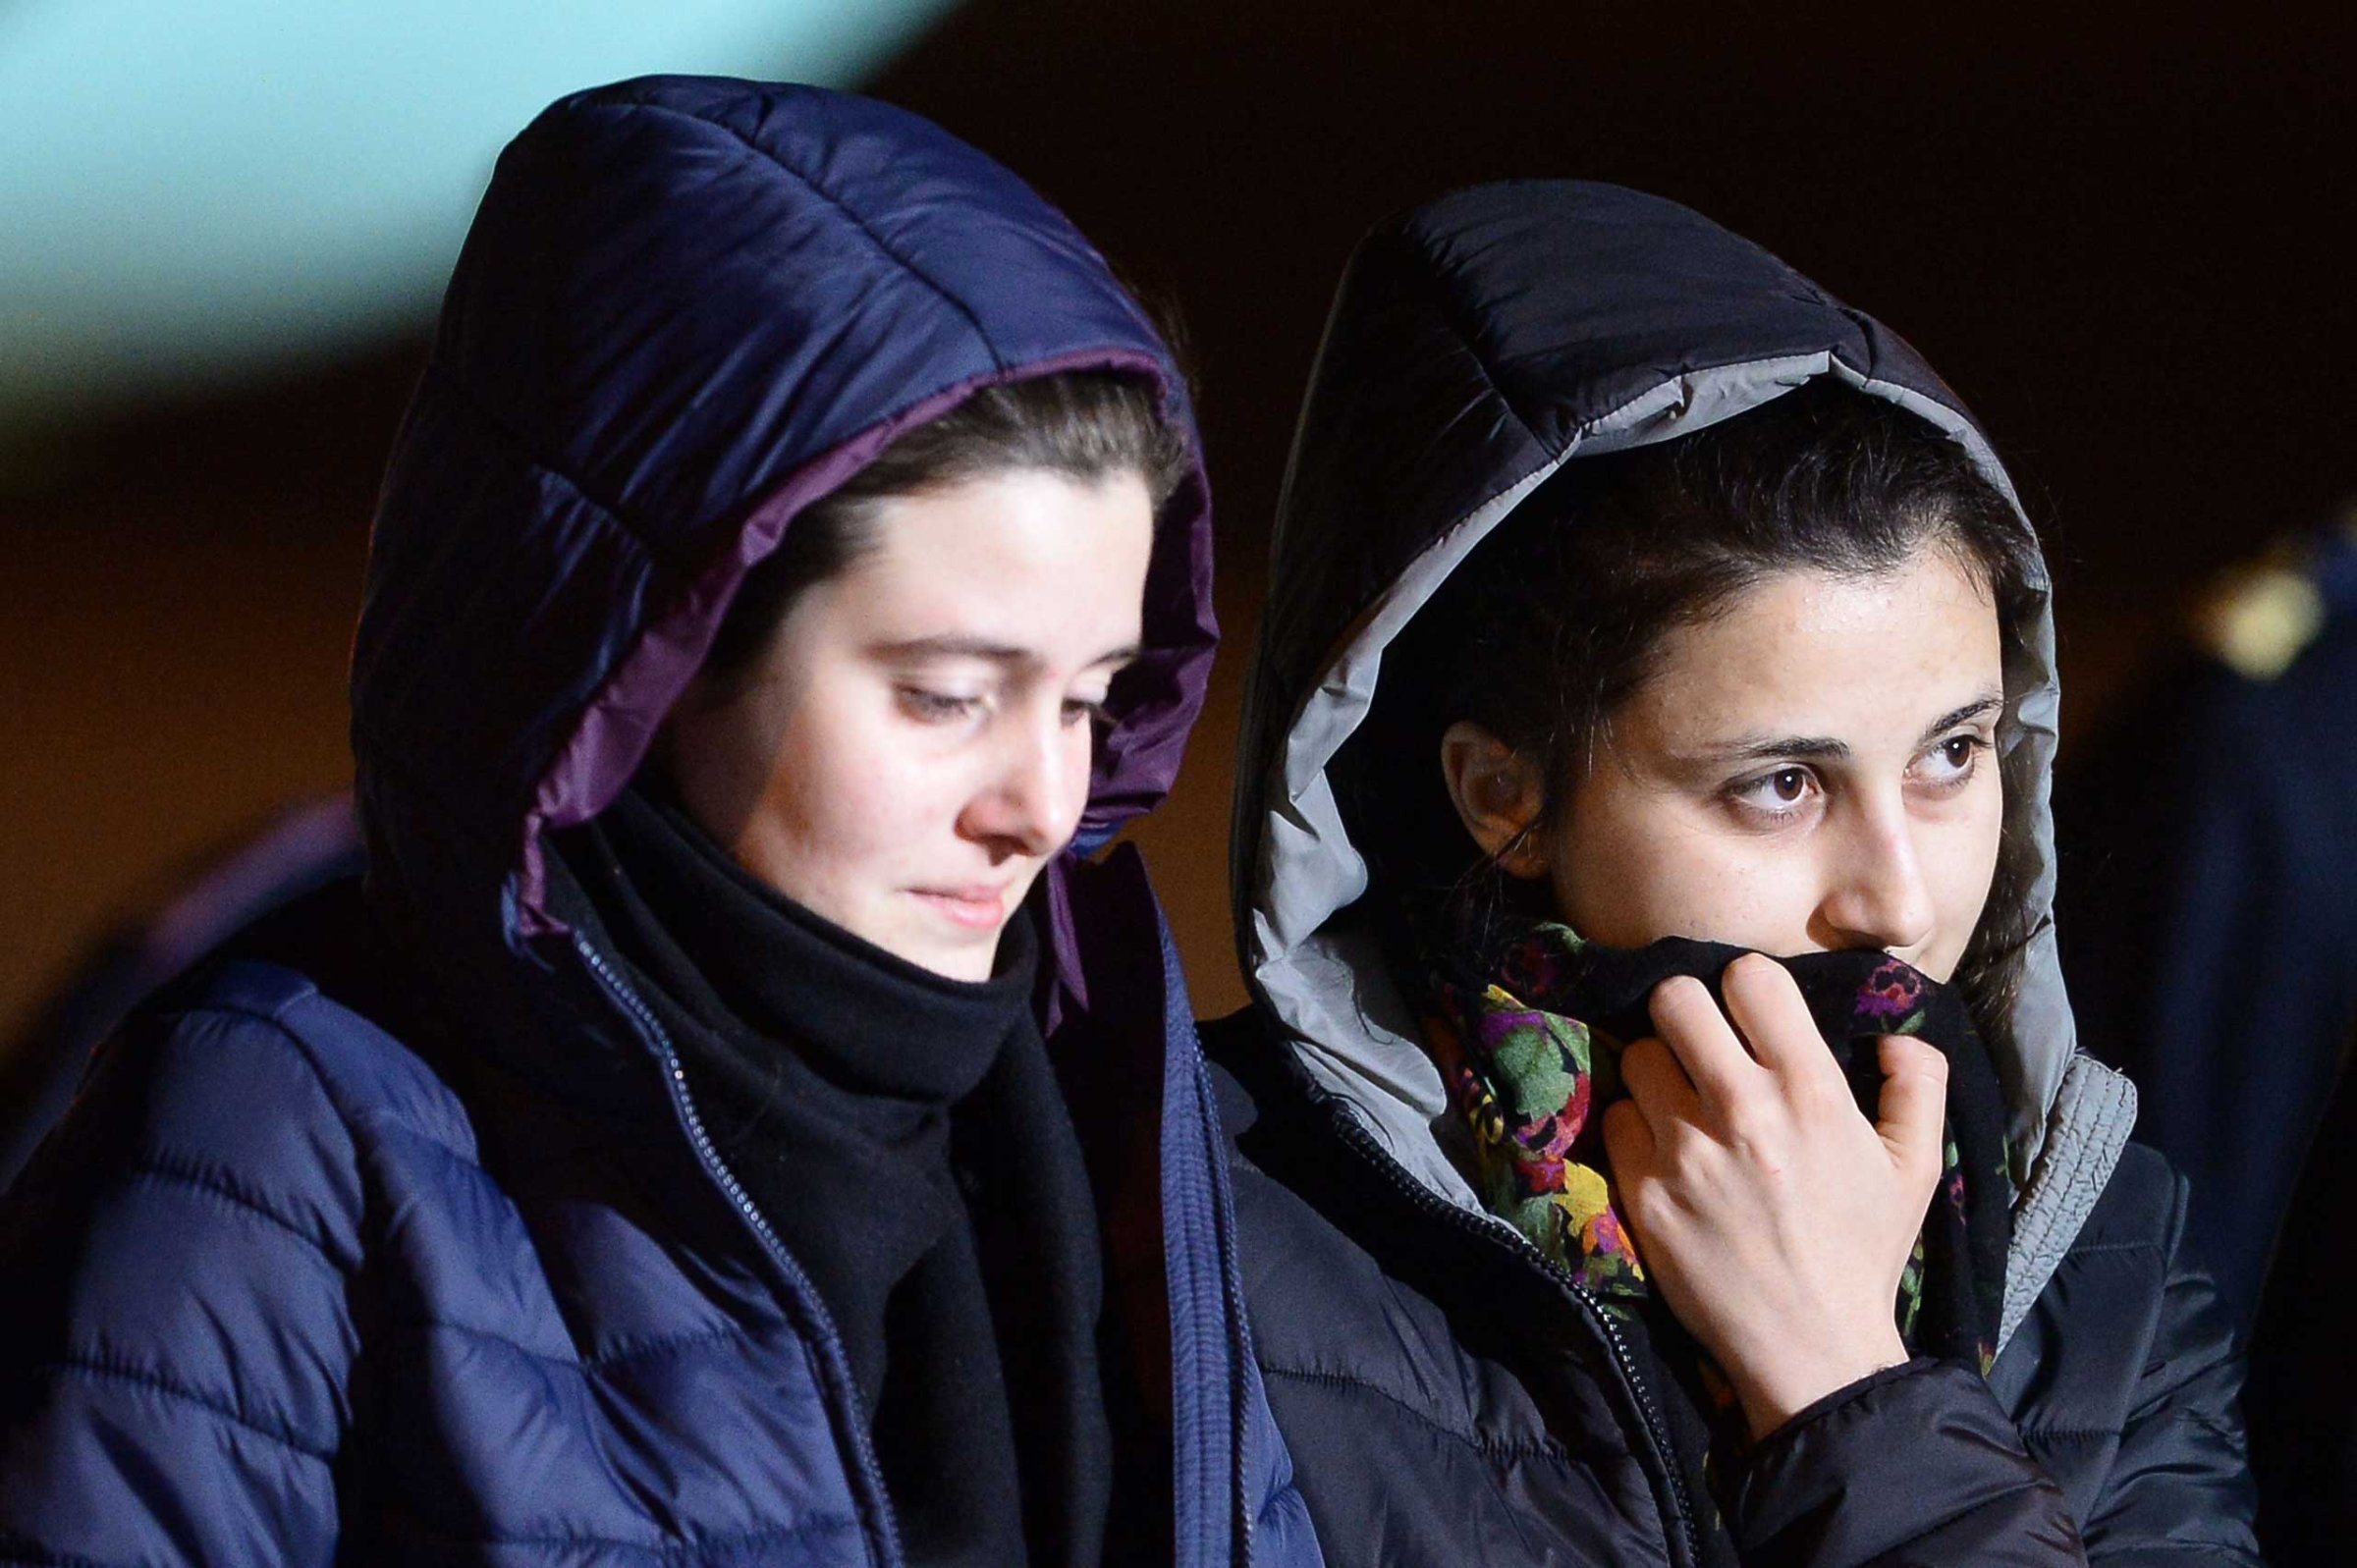 Italian aid workers abducted in Syria last summer, Greta Ramelli (L) and Vanessa Marzullo arrive at Ciampino airport in Rome early on Jan. 16, 2015.